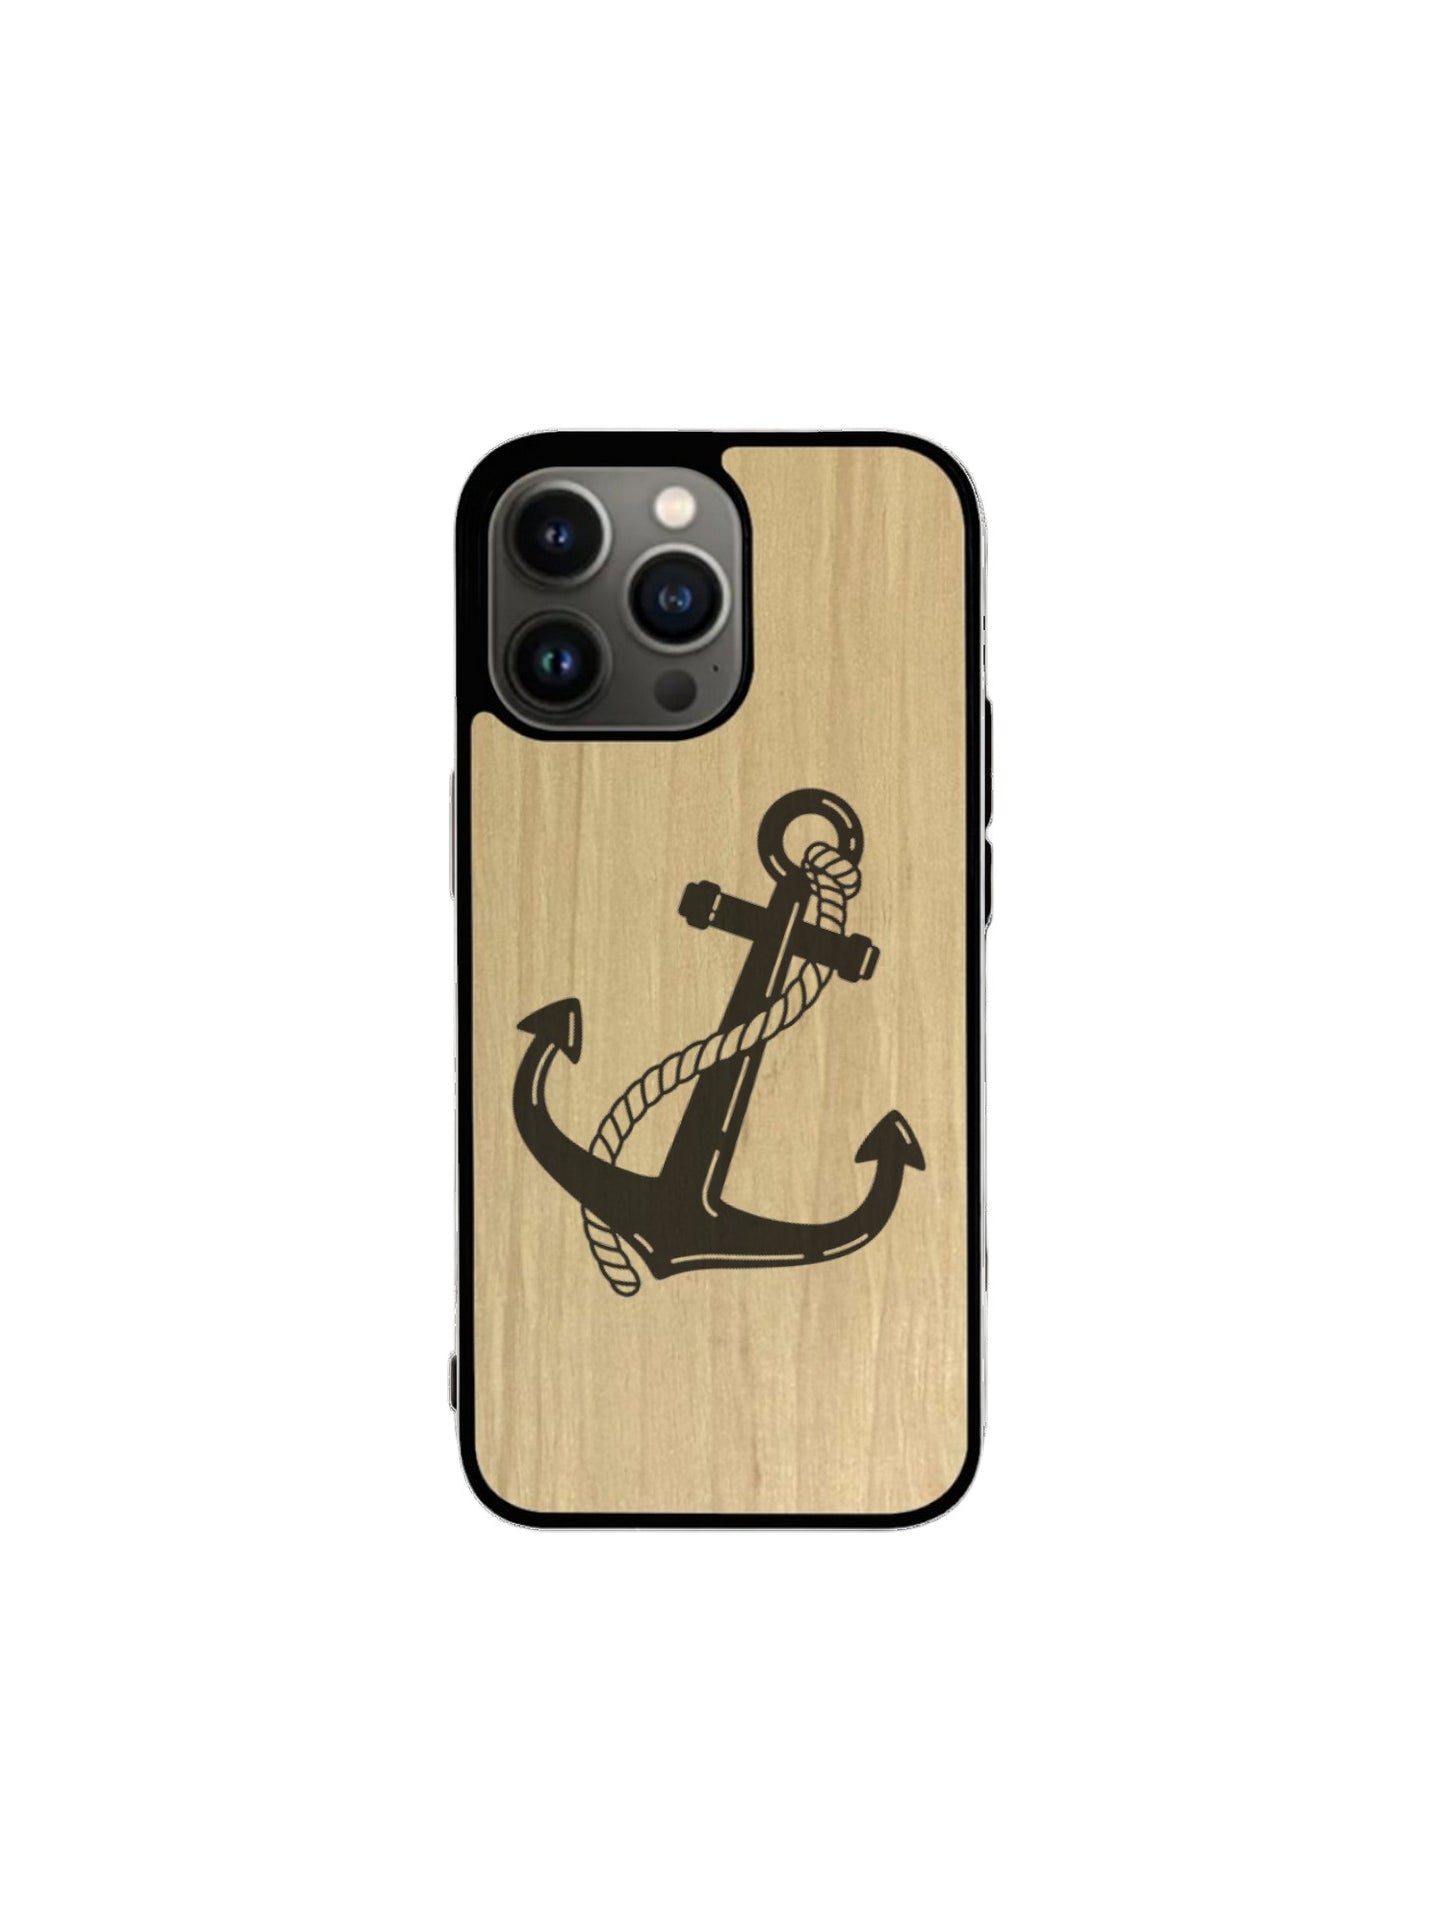 Iphone case - Boat anchor